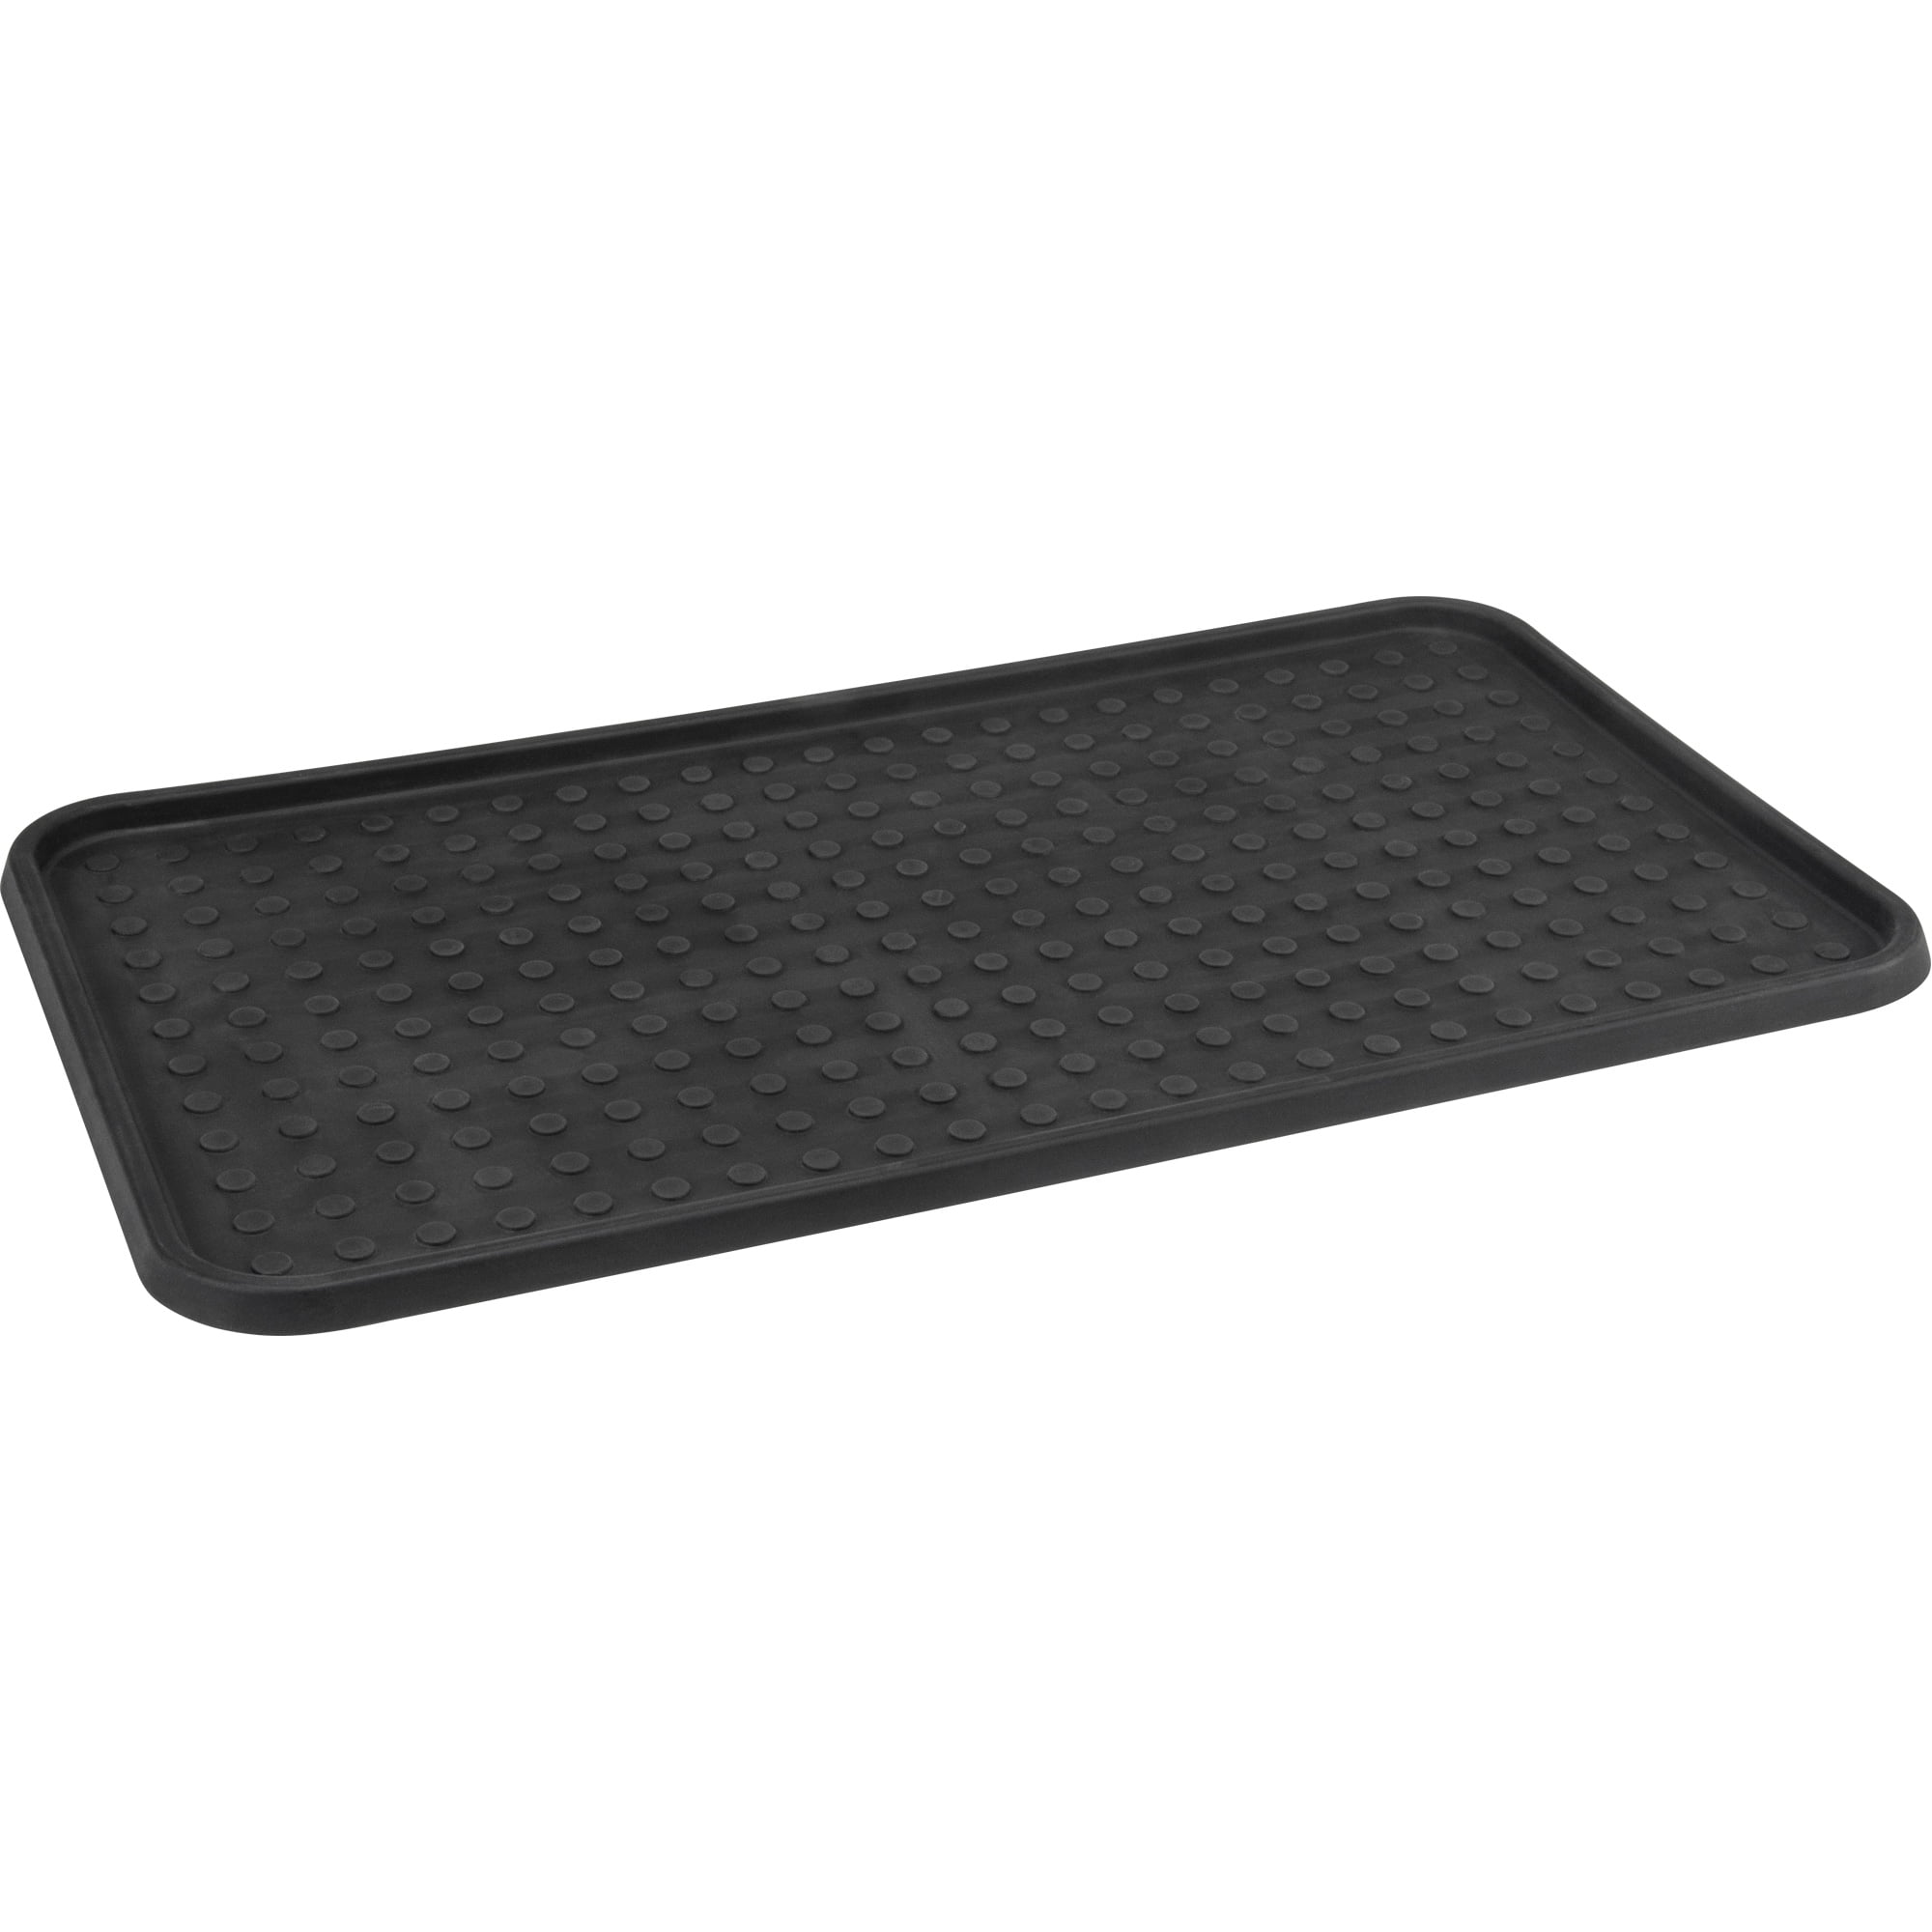 Zenith Safety Products Boot Tray, 15 by 